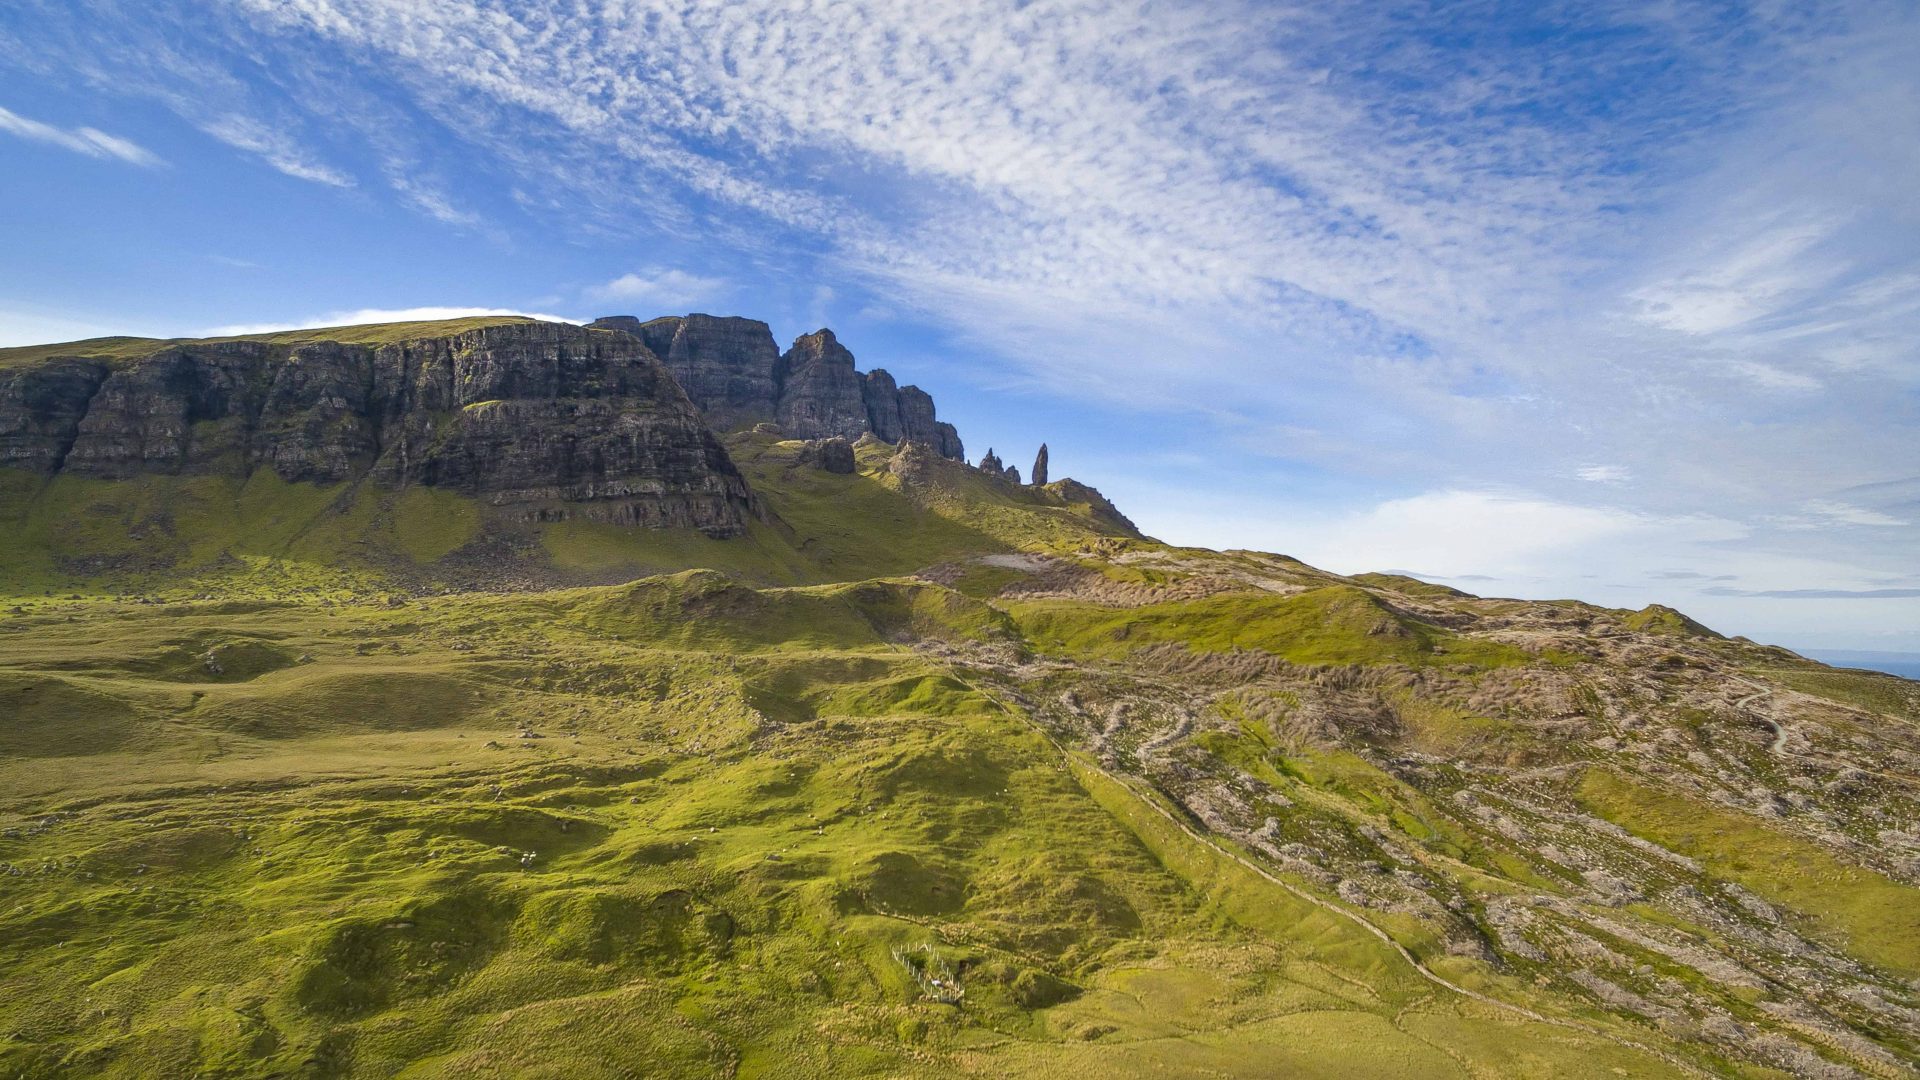 A scenic landscape shot of the iconic Old Man of Storr, Skye.